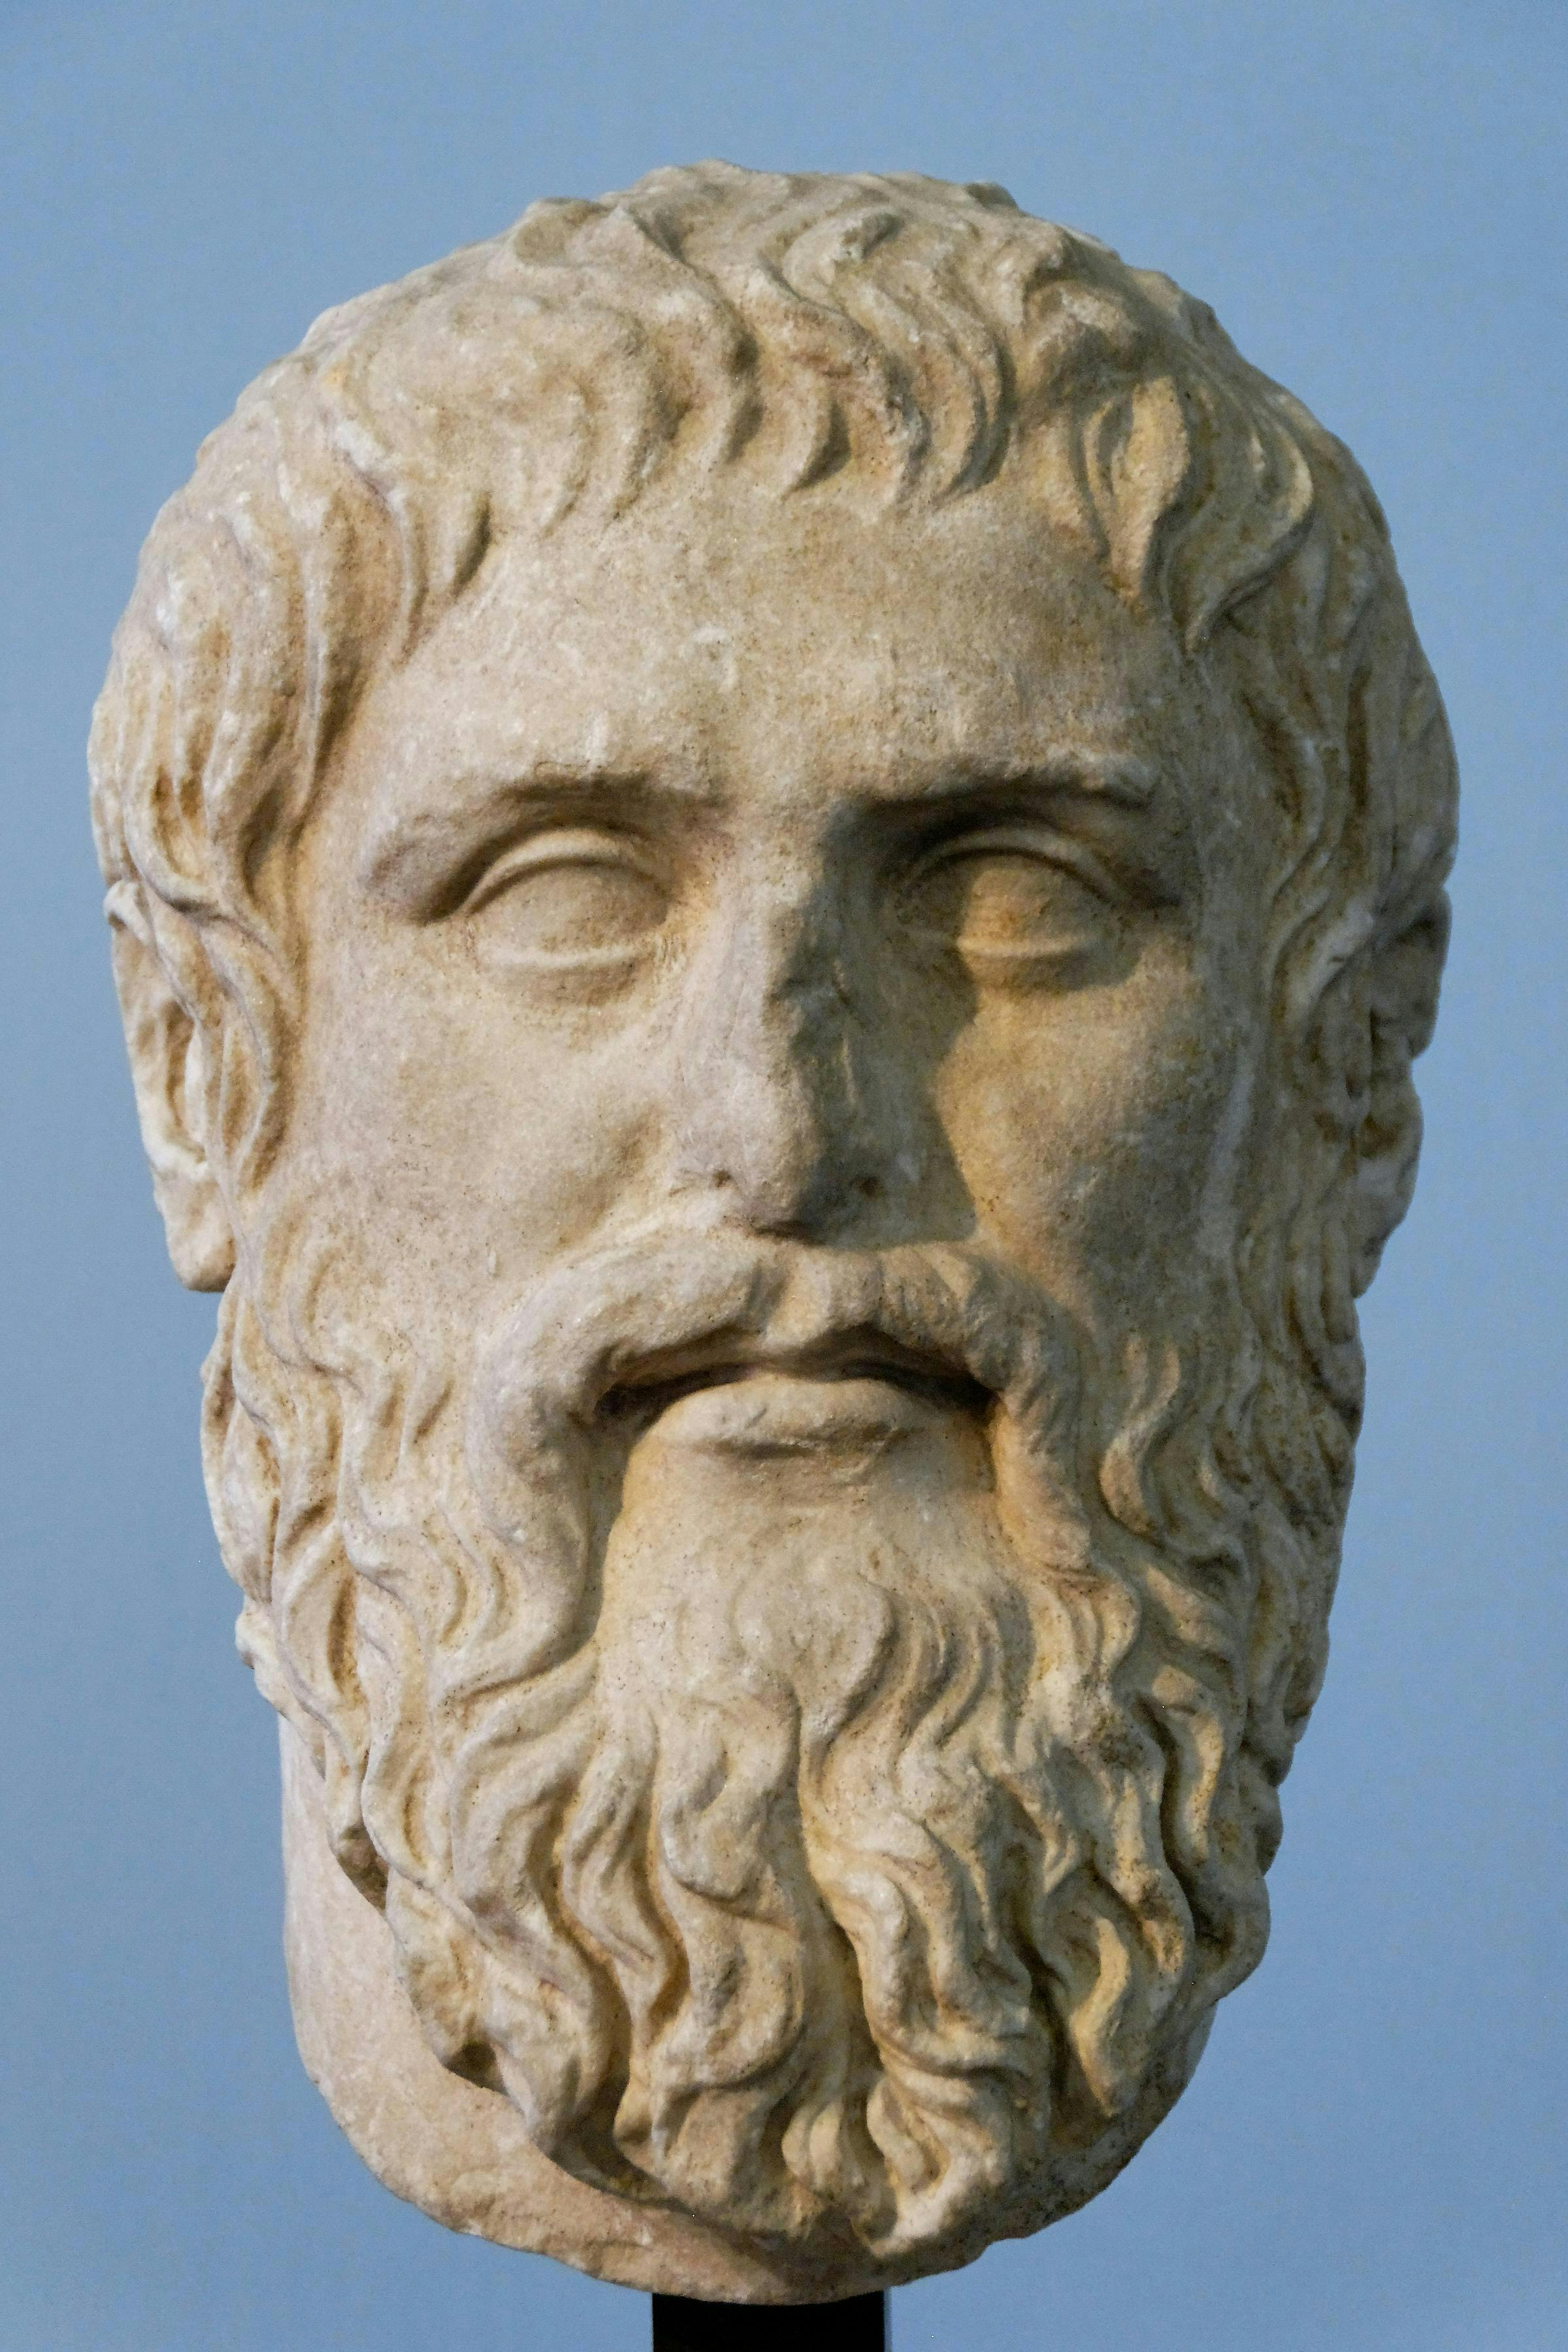 A stone bust of an ancient bearded man is displayed against a plain blue background, showcasing intricate detailing on facial features and hair.